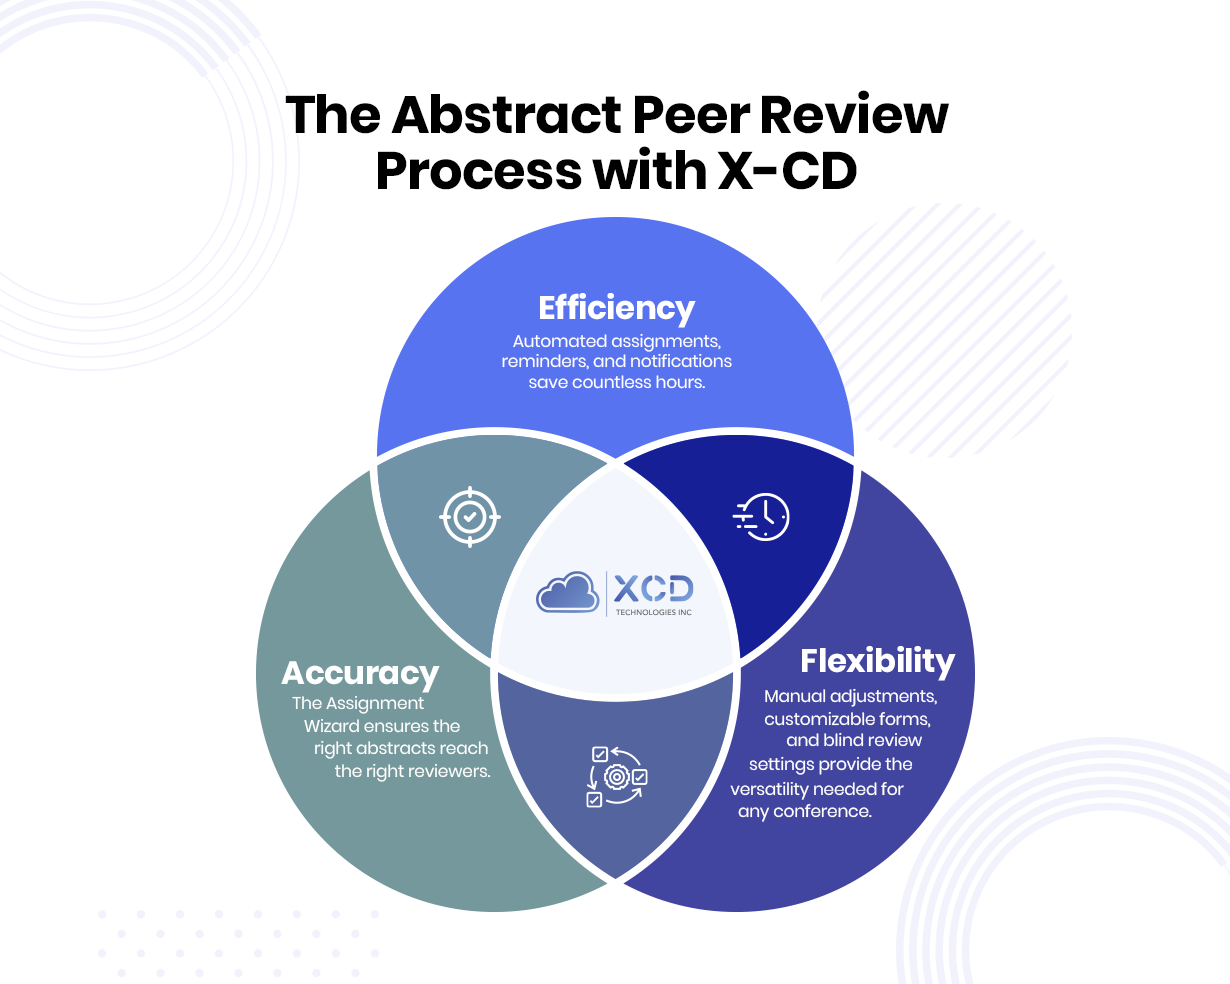 Graphic titled 'The Abstract Peer Review Process with X-CD' featuring a Venn diagram with three intersecting circles in blue and teal, representing 'Efficiency,' 'Accuracy,' and 'Flexibility.' The 'Efficiency' circle highlights automated assignments and notifications, the 'Accuracy' circle emphasizes ensuring the right abstracts reach the right reviewers, and the 'Flexibility' circle focuses on customizable forms and blind review settings. The graphic combines these elements to illustrate the comprehensive features of X-CD's peer review software, with the X-CD logo at the center of the diagram.